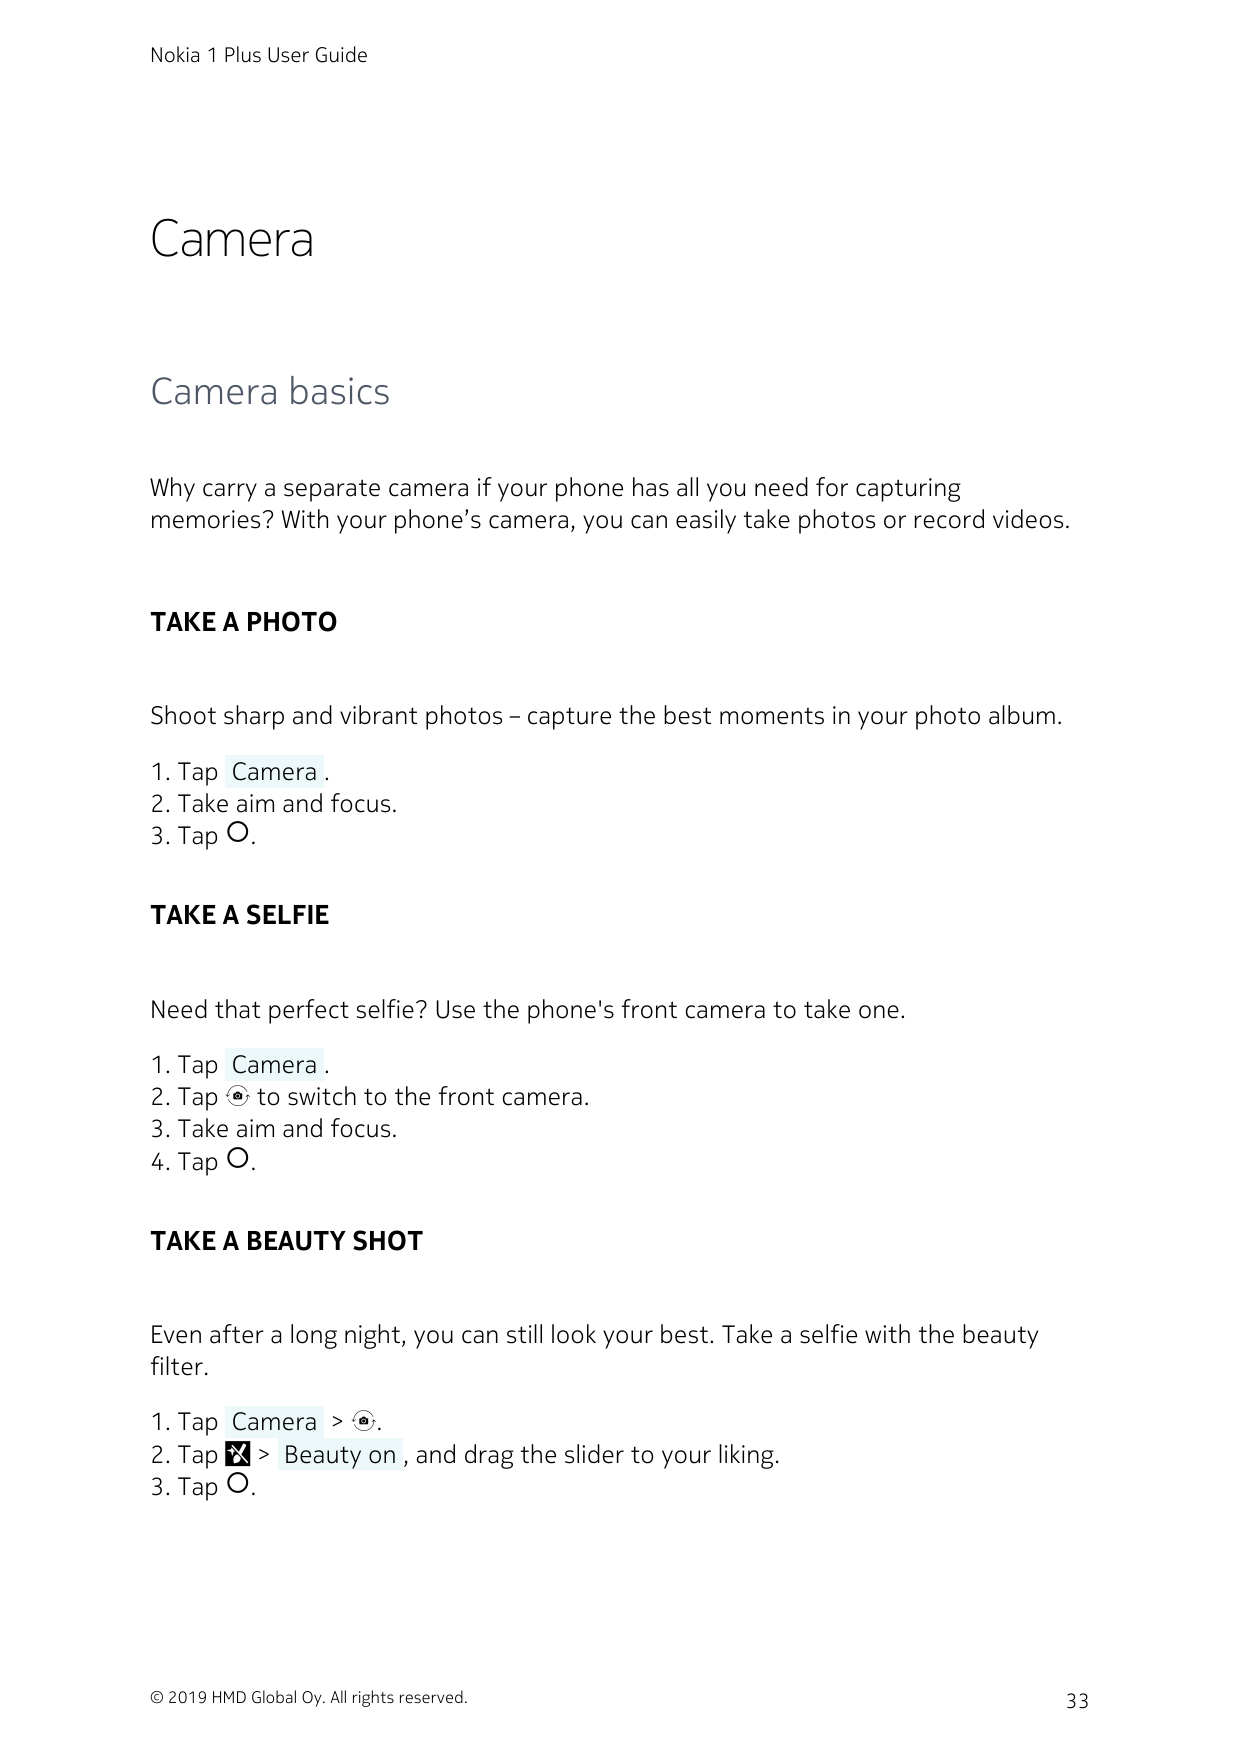 Nokia 1 Plus User GuideCameraCamera basicsWhy carry a separate camera if your phone has all you need for capturingmemories? With